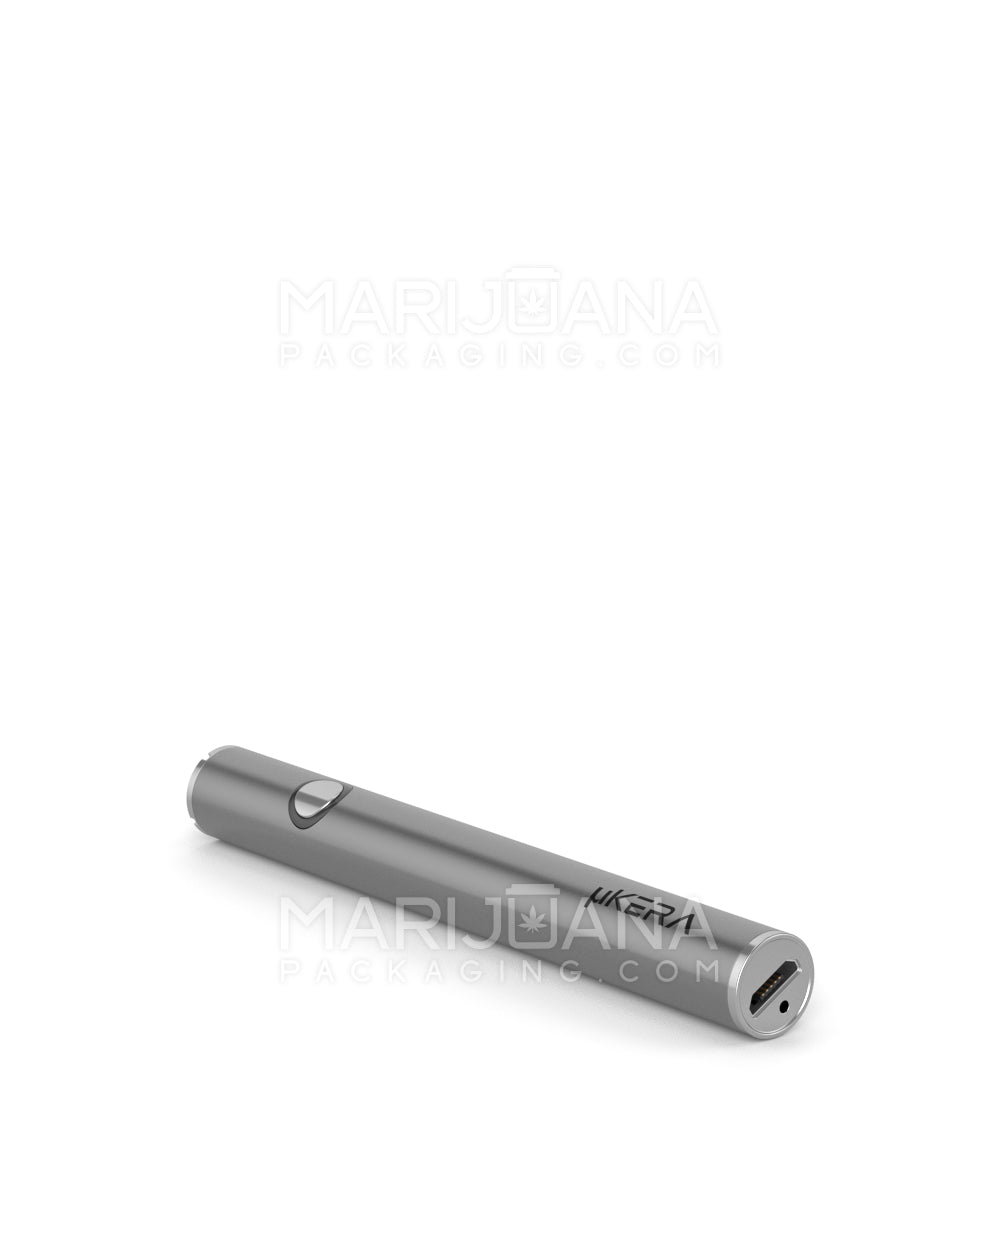 Variable Voltage Vape Battery | 320mAh - Silver - 80 Count - 6